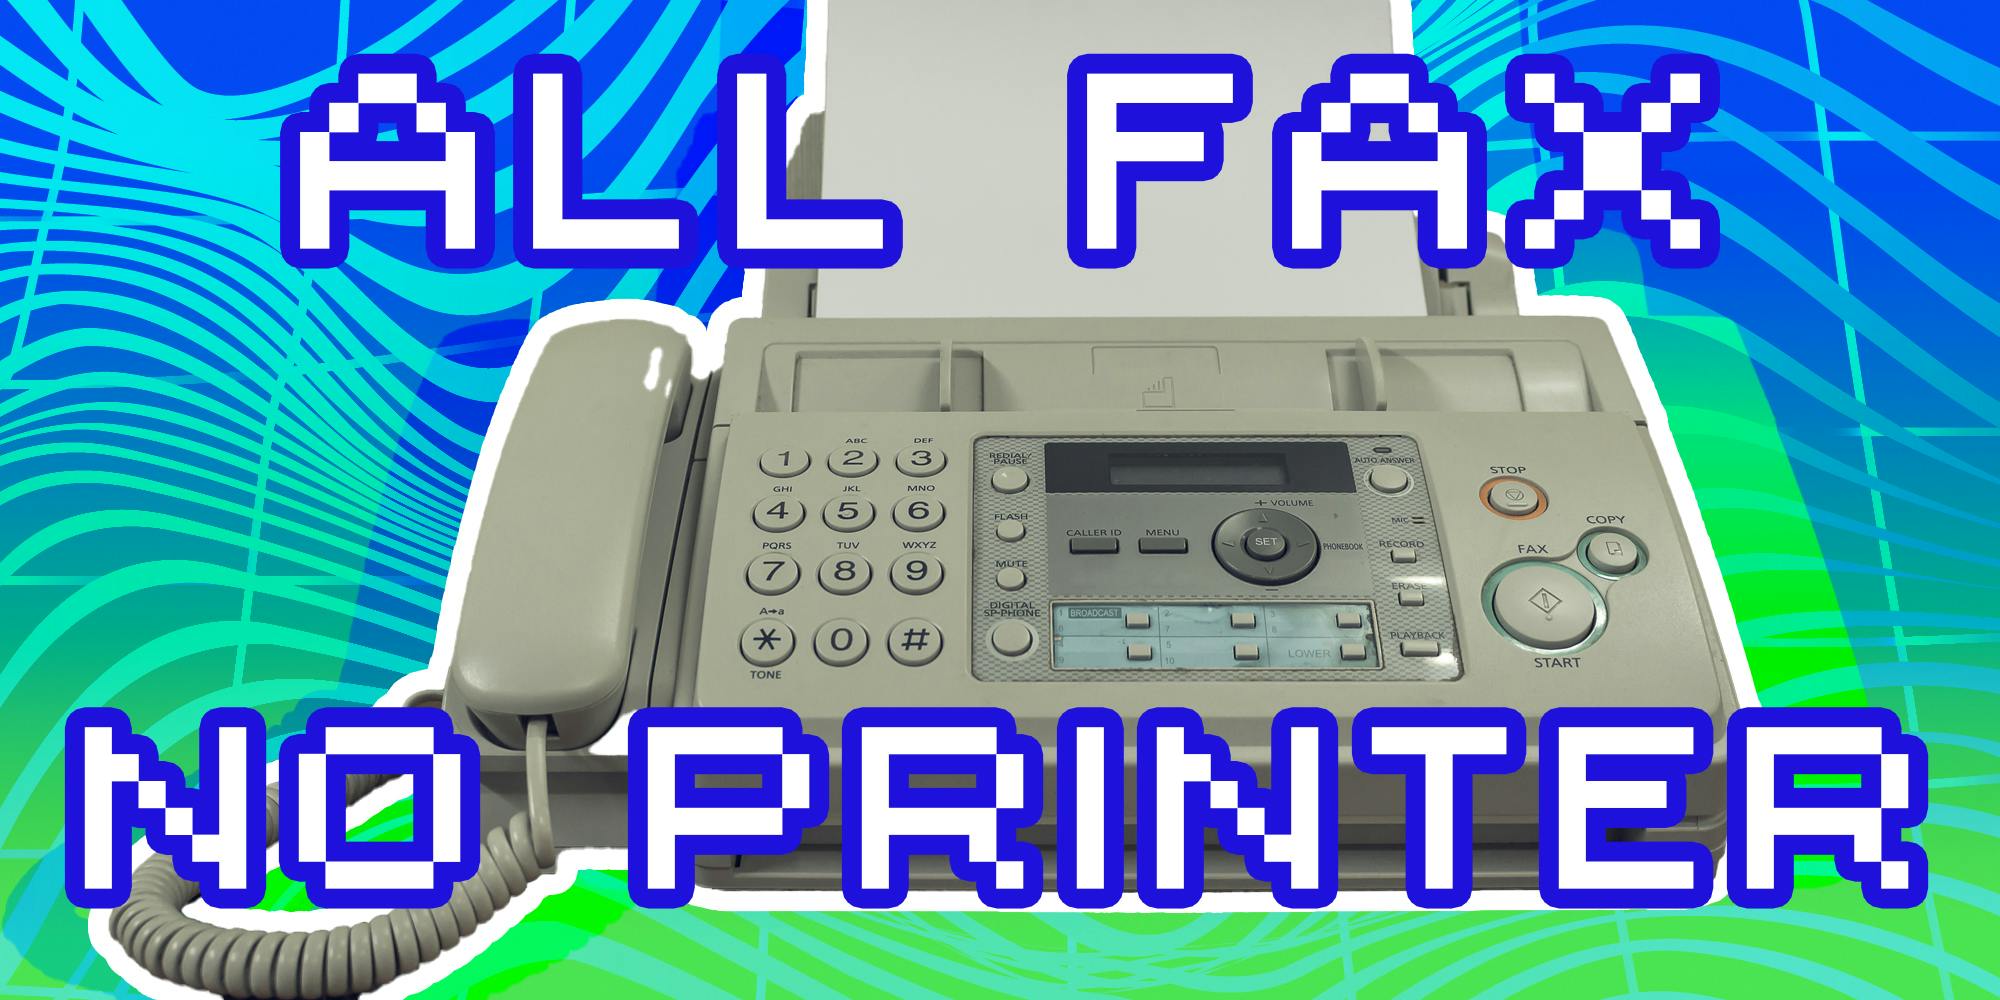 fax no printer: Fax with abstract background with text that reads 'all fax, no printer'